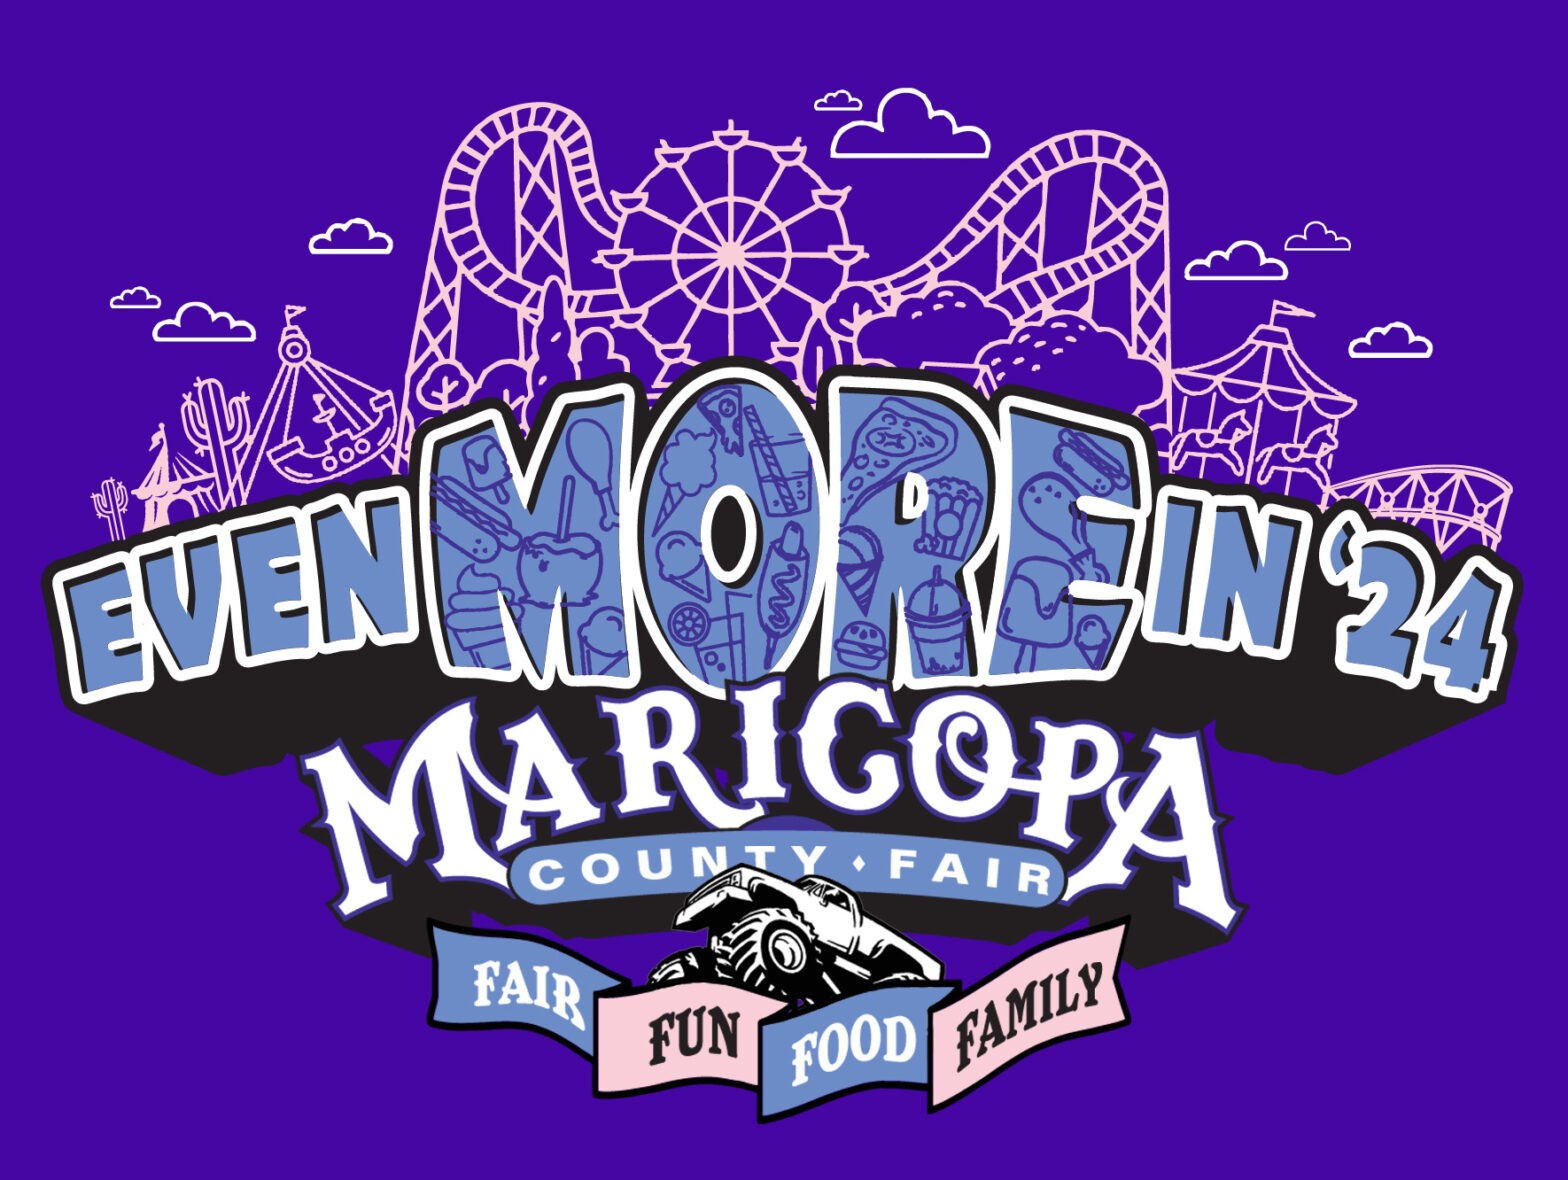 Featured image for post: Maricopa County Fair: Even MORE In ‘24